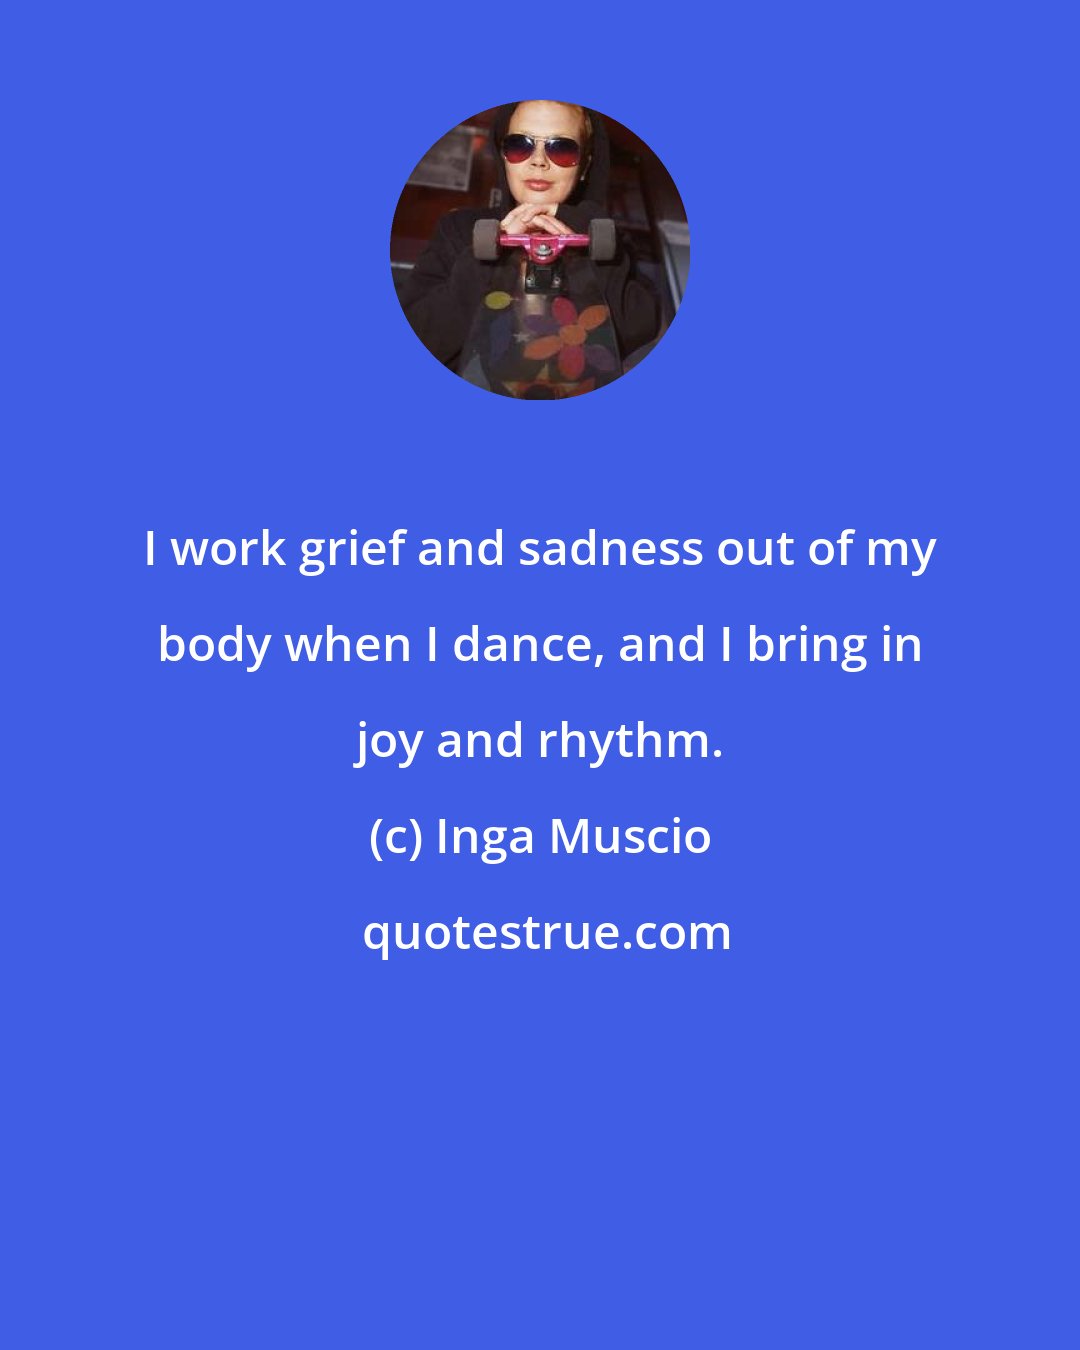 Inga Muscio: I work grief and sadness out of my body when I dance, and I bring in joy and rhythm.